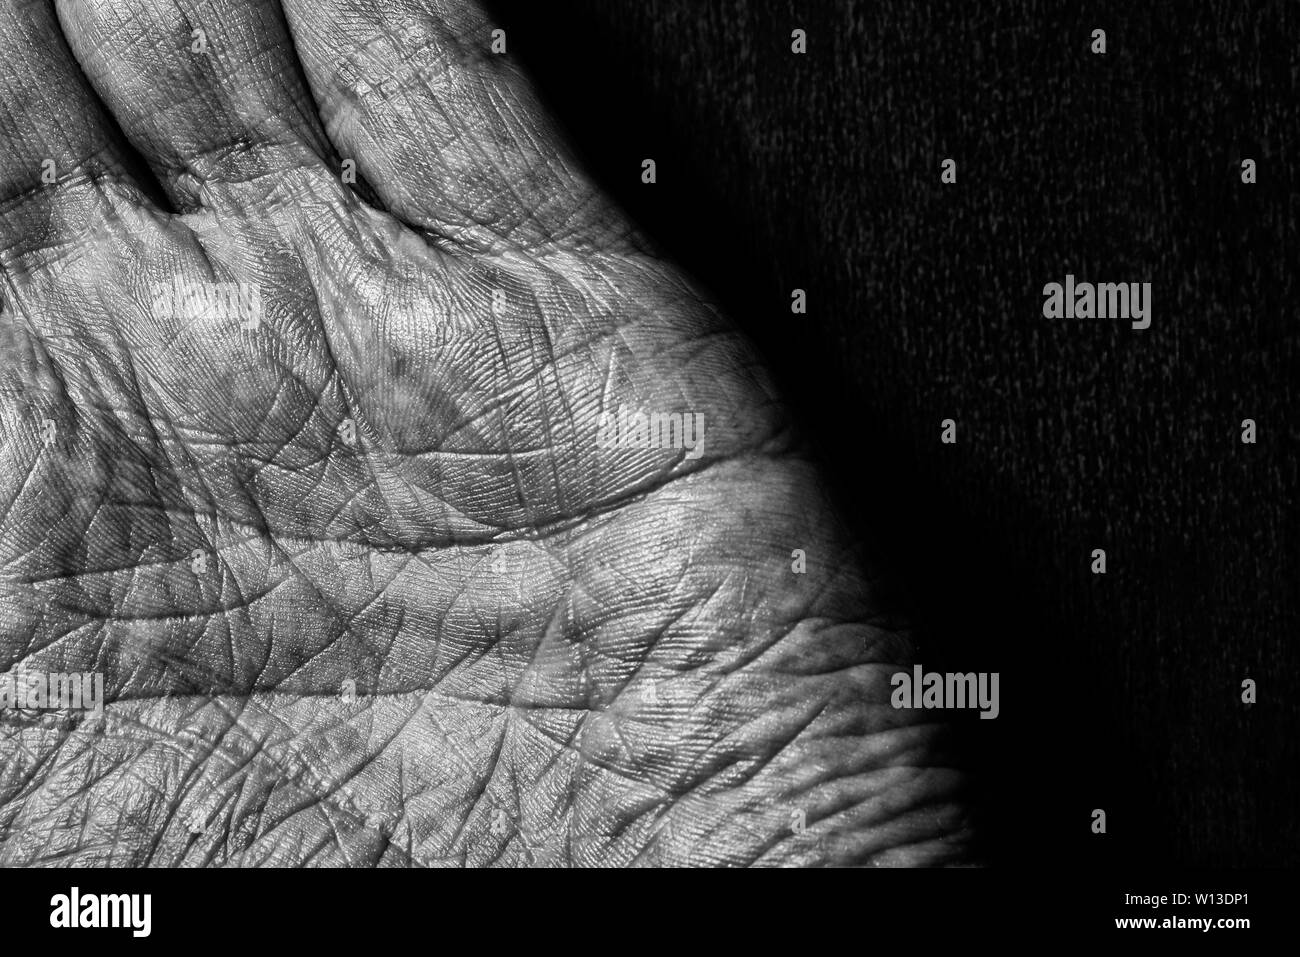 Black and white picture of elderly male hands on a dark background. Detail of the palm of the hand. Stock Photo